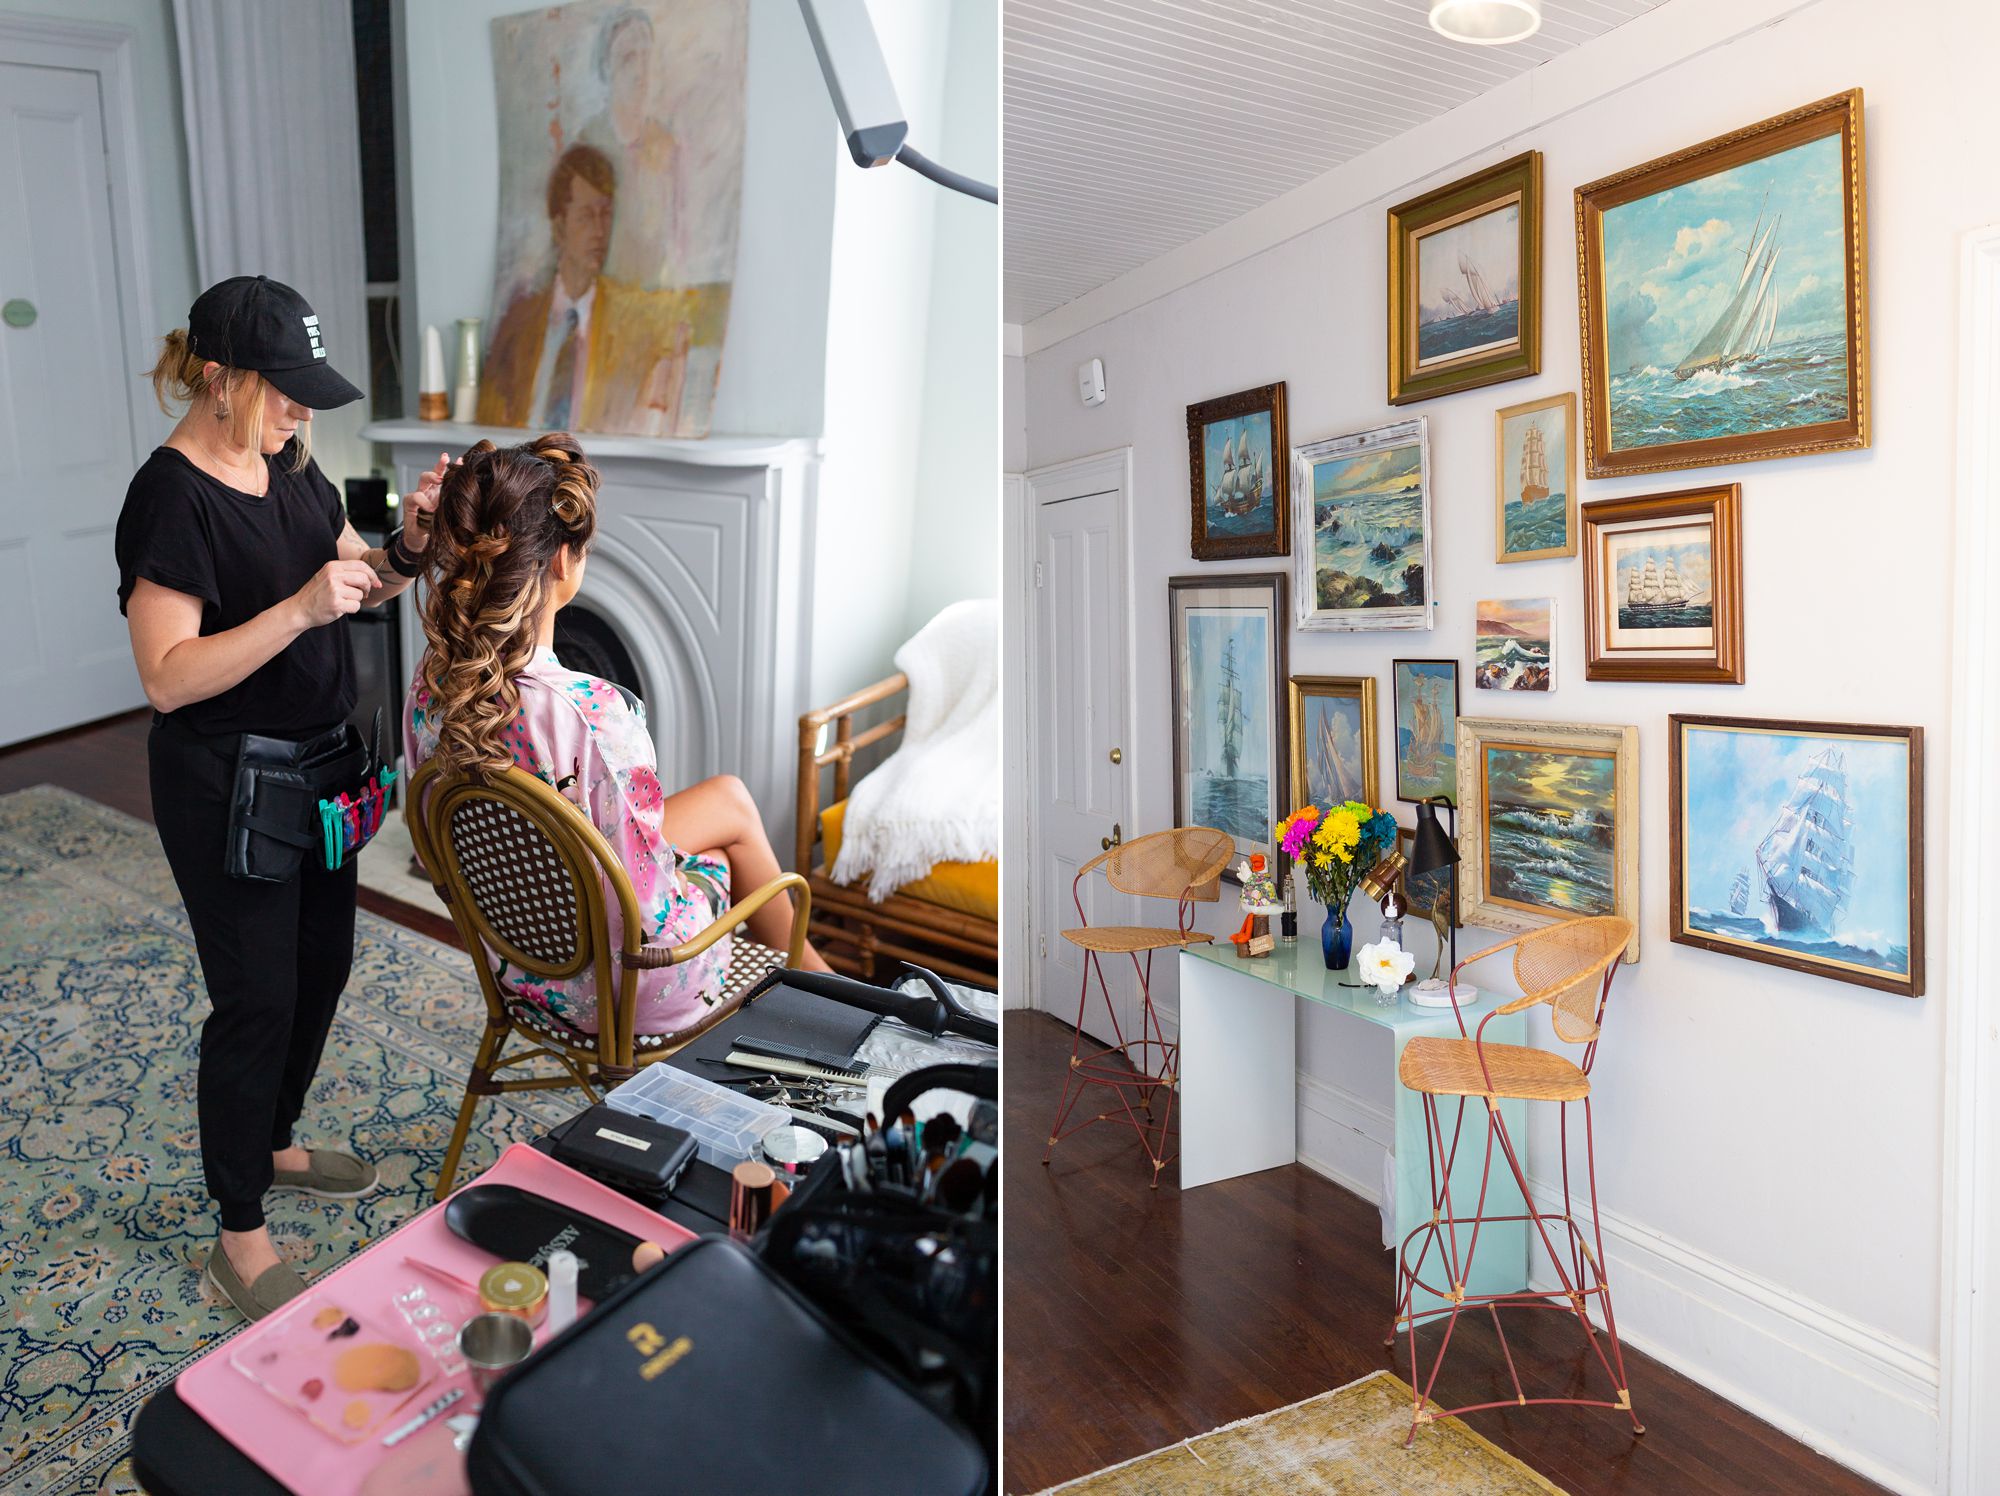 A hairstylist works on a bride's hair; a gallery of sailing ship paintings in a hallway.